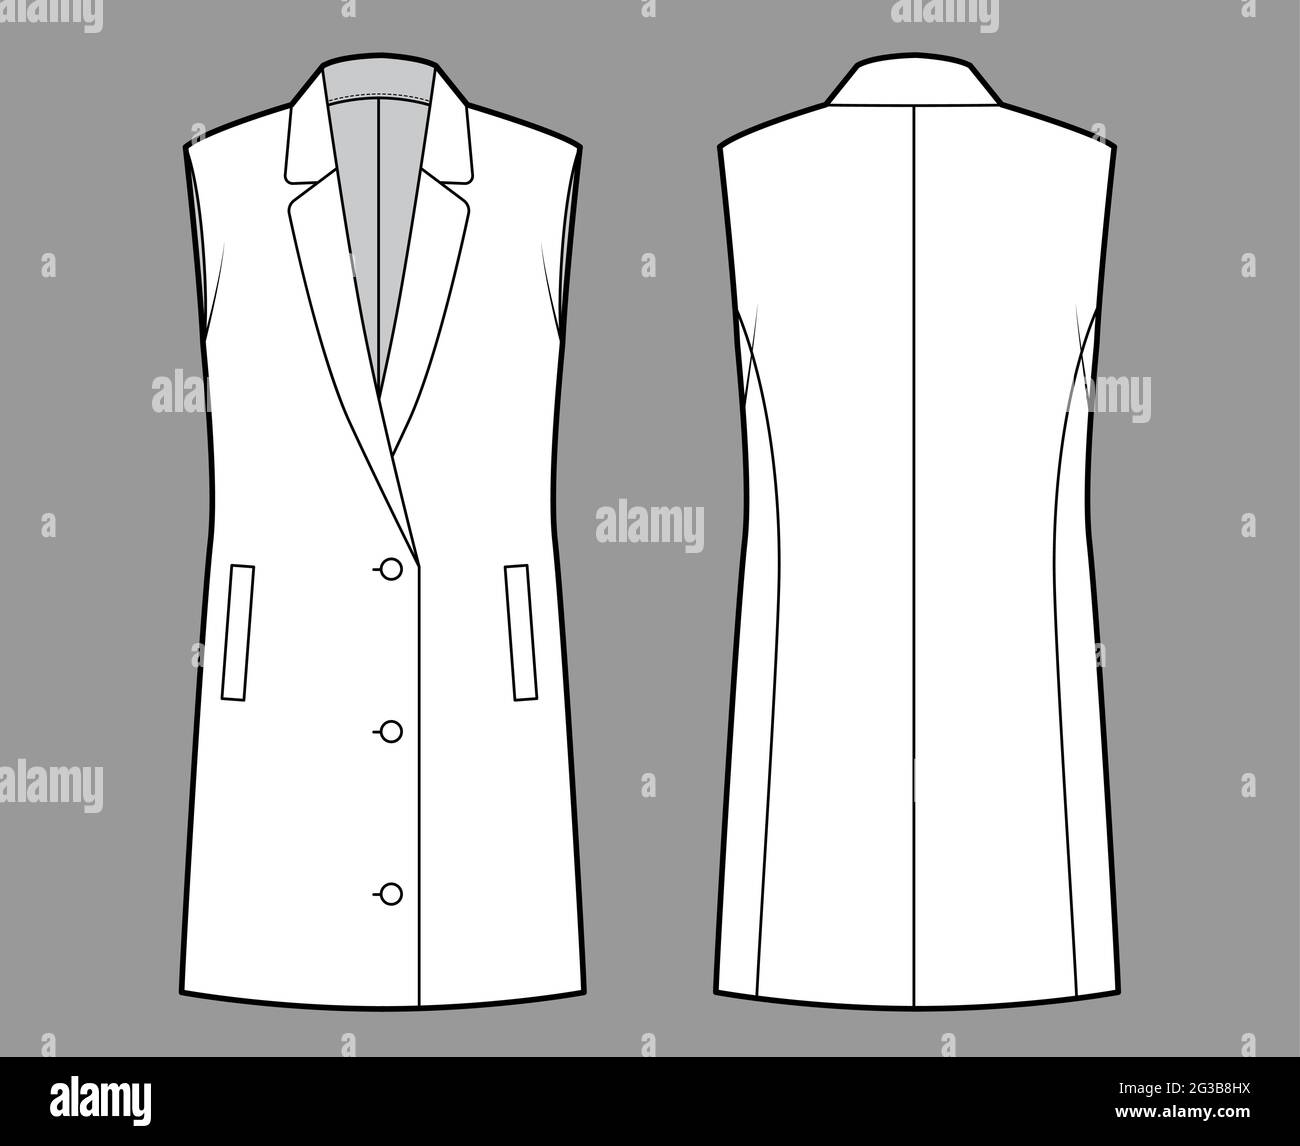 Sleeveless jacket lapelled vest waistcoat technical fashion illustration with button-up closure, pockets, oversized. Flat template front, back, white color style. Women, men unisex top CAD mockup Stock Vector